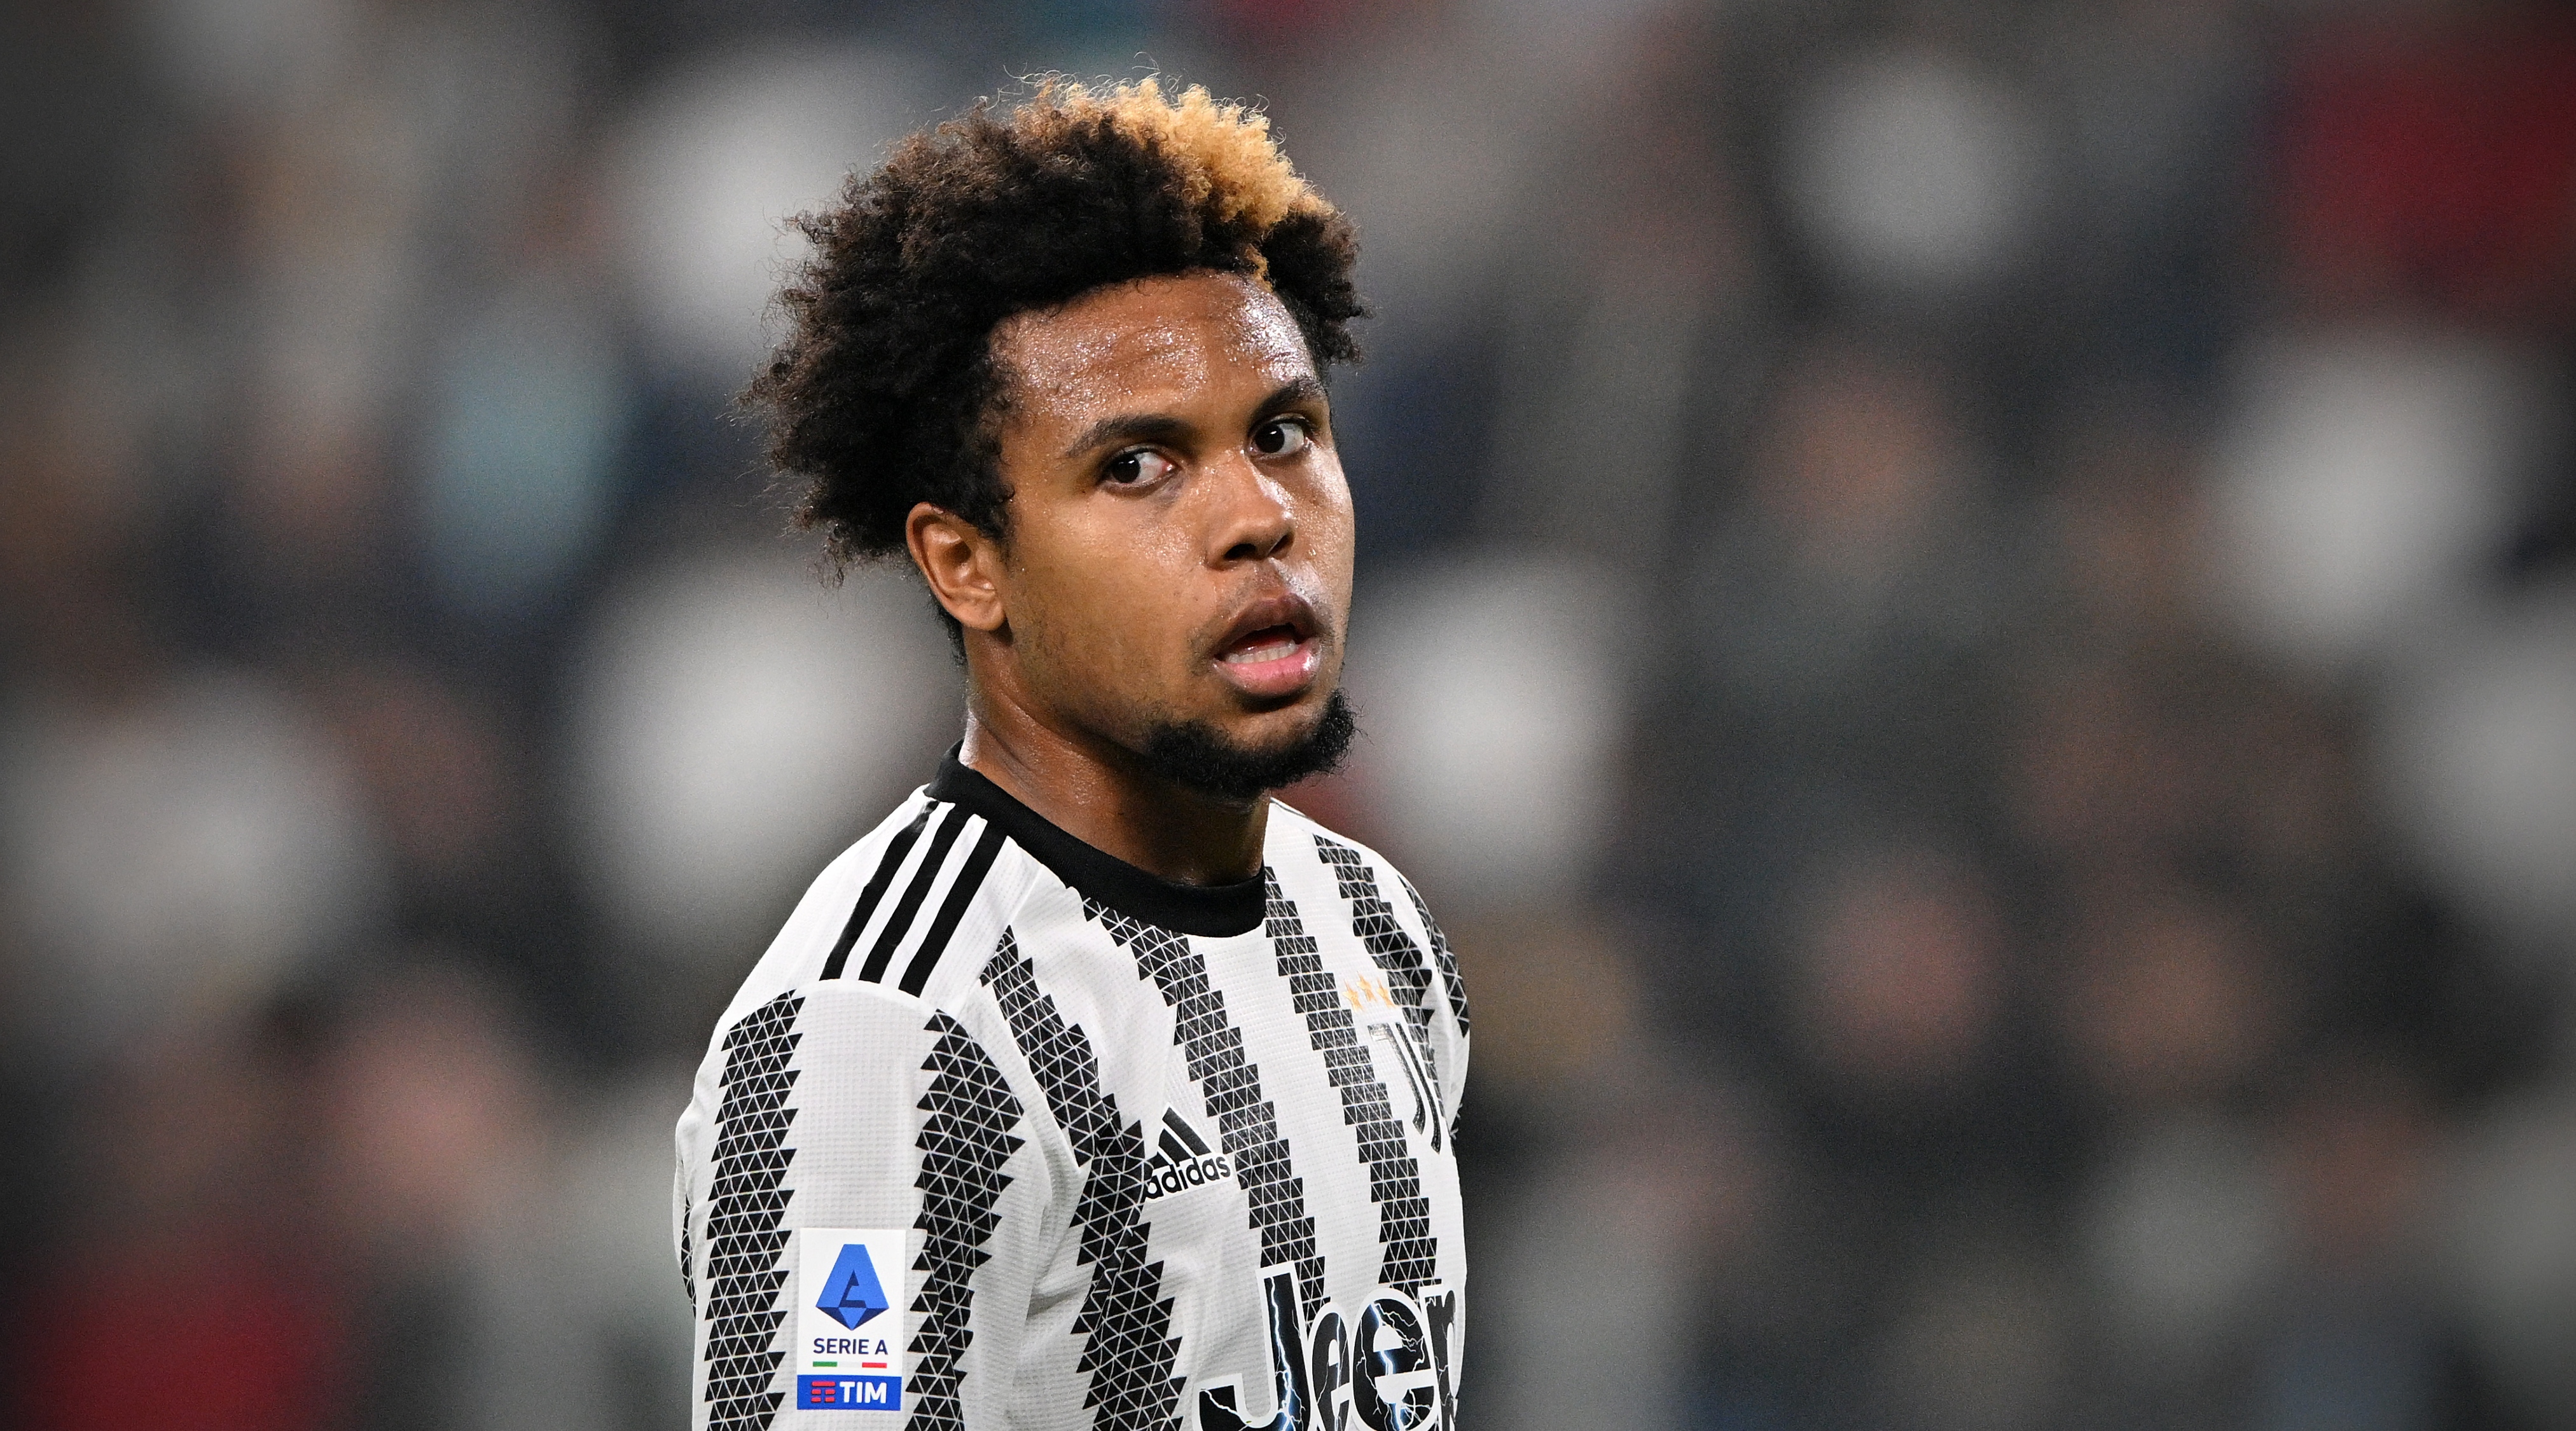 Chelsea-linked Weston McKennie of Juventus looks back during the Serie A match between Juventus and Empoli on 21 October, 2022 at the Allianz Stadium in Turin, Italy.